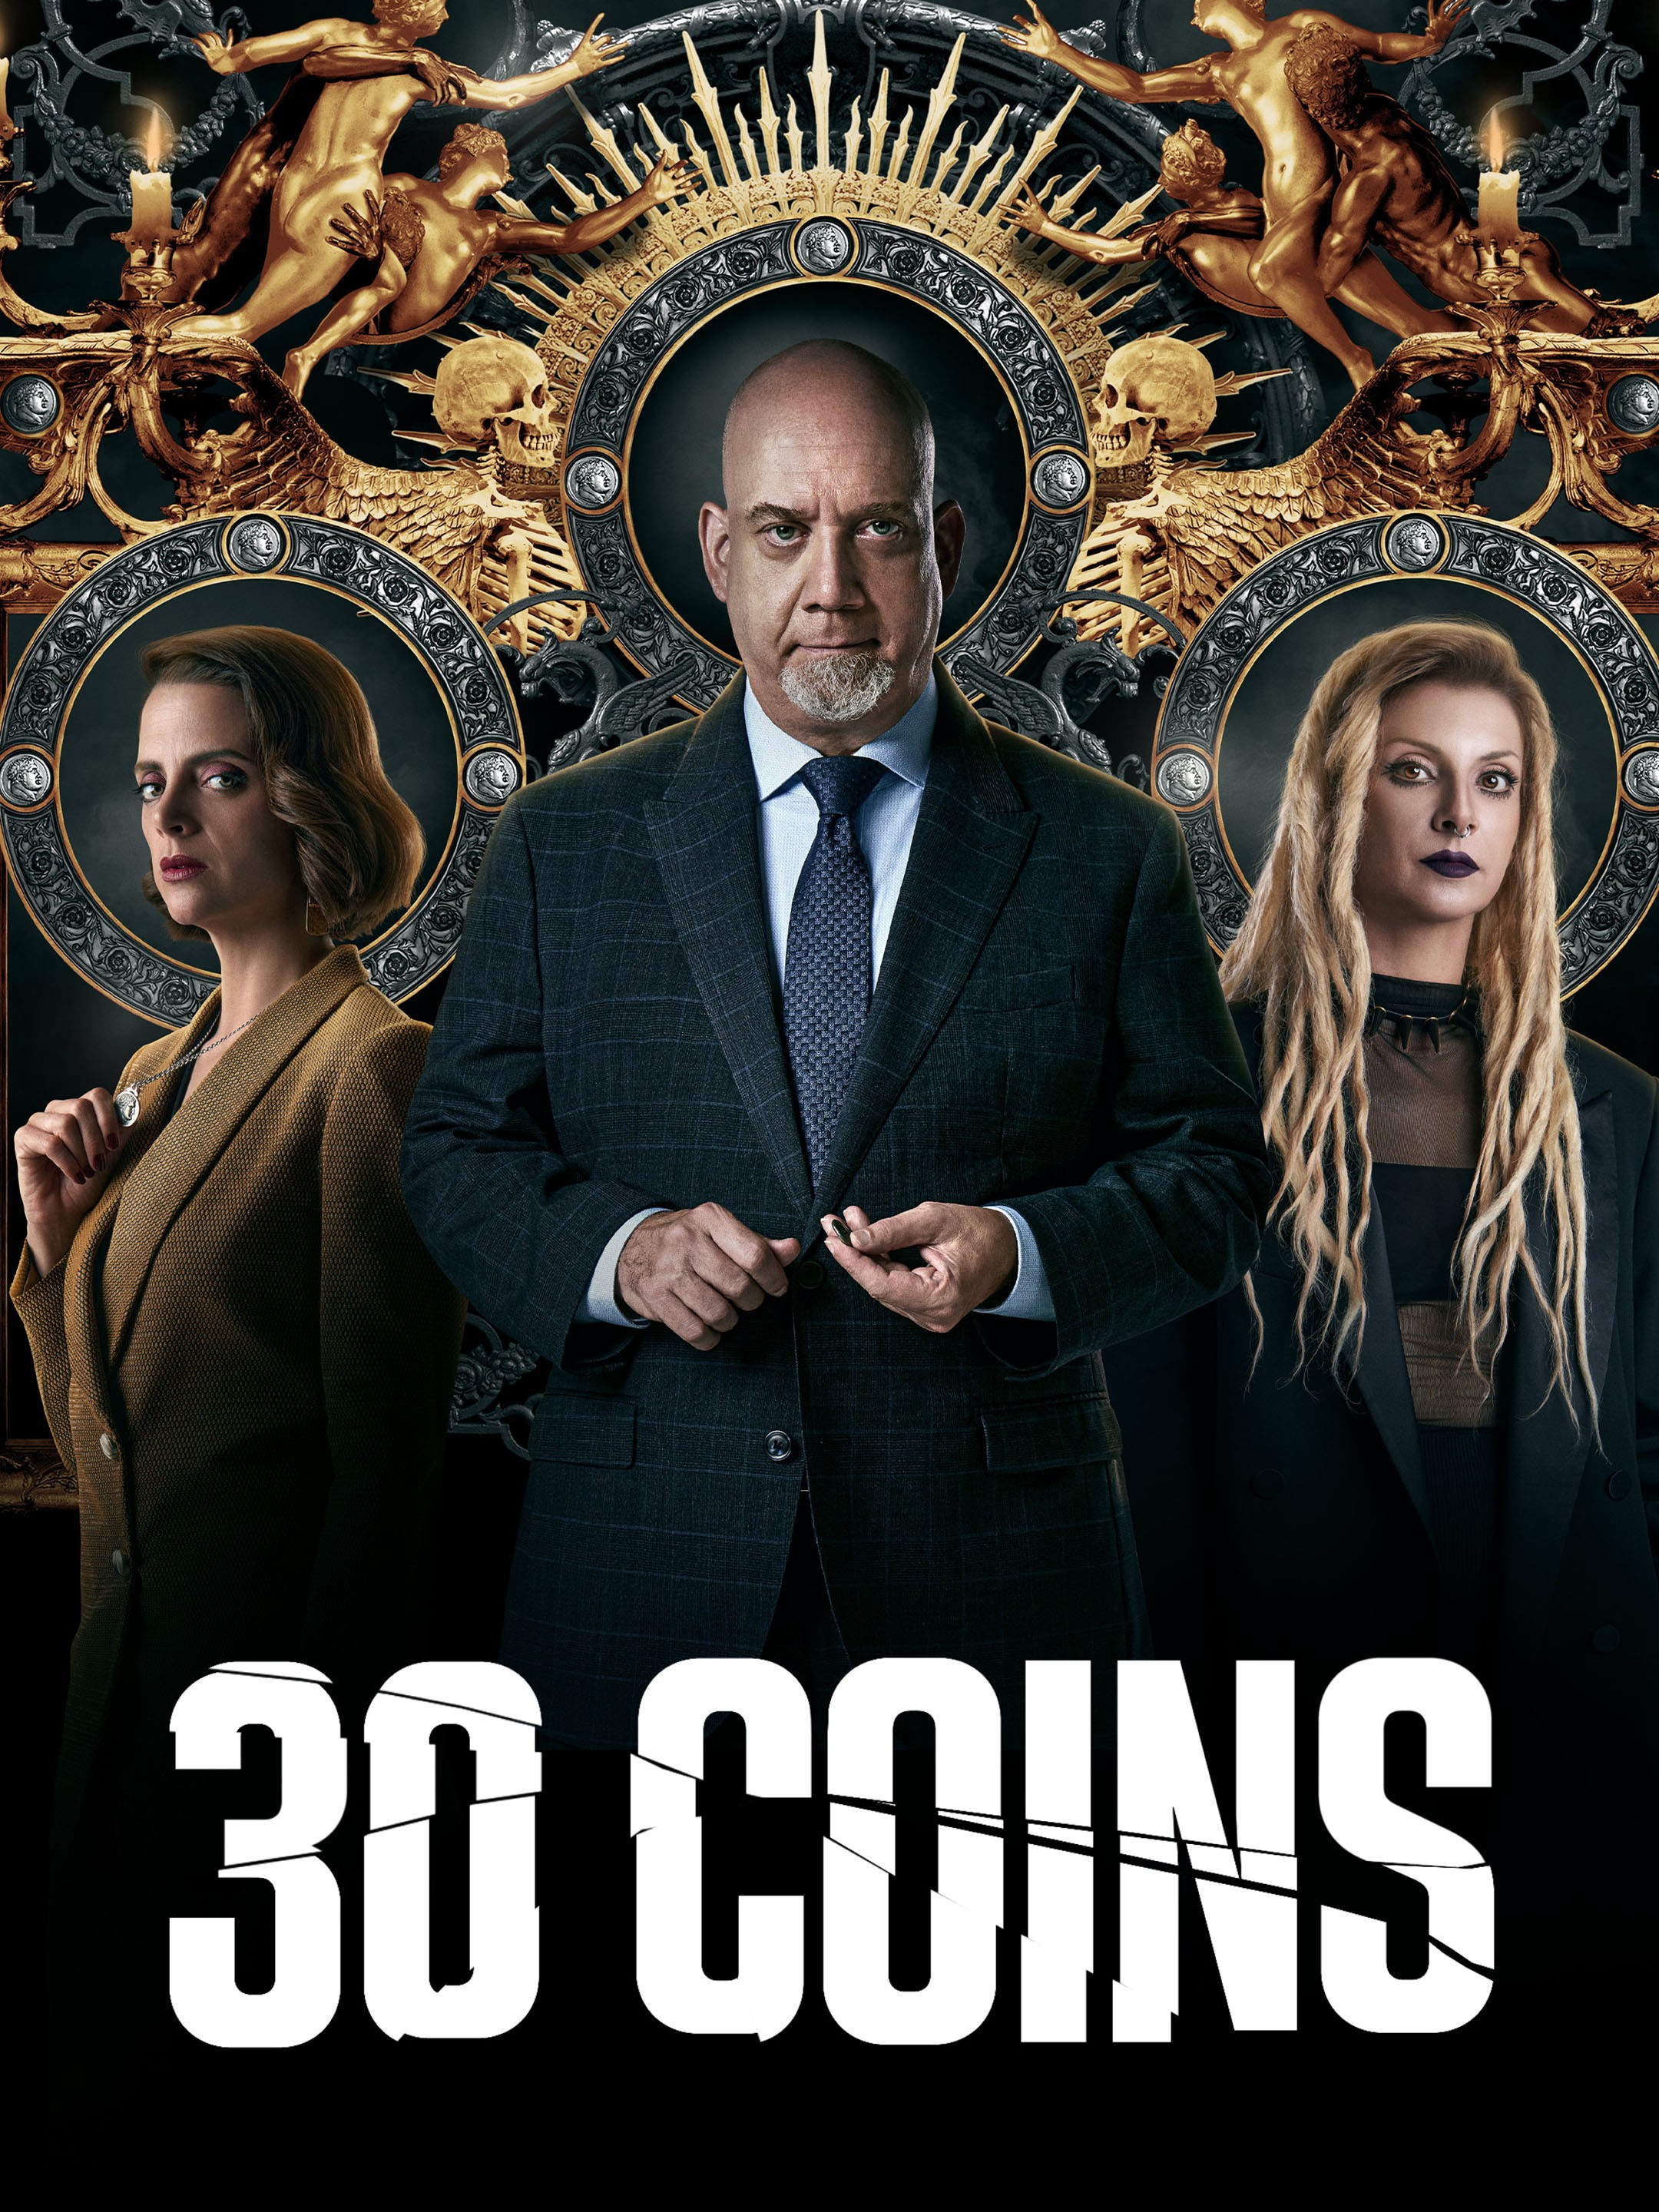 30 Coins (30 Monedas): Devilishly Frightening – HBO Max Review